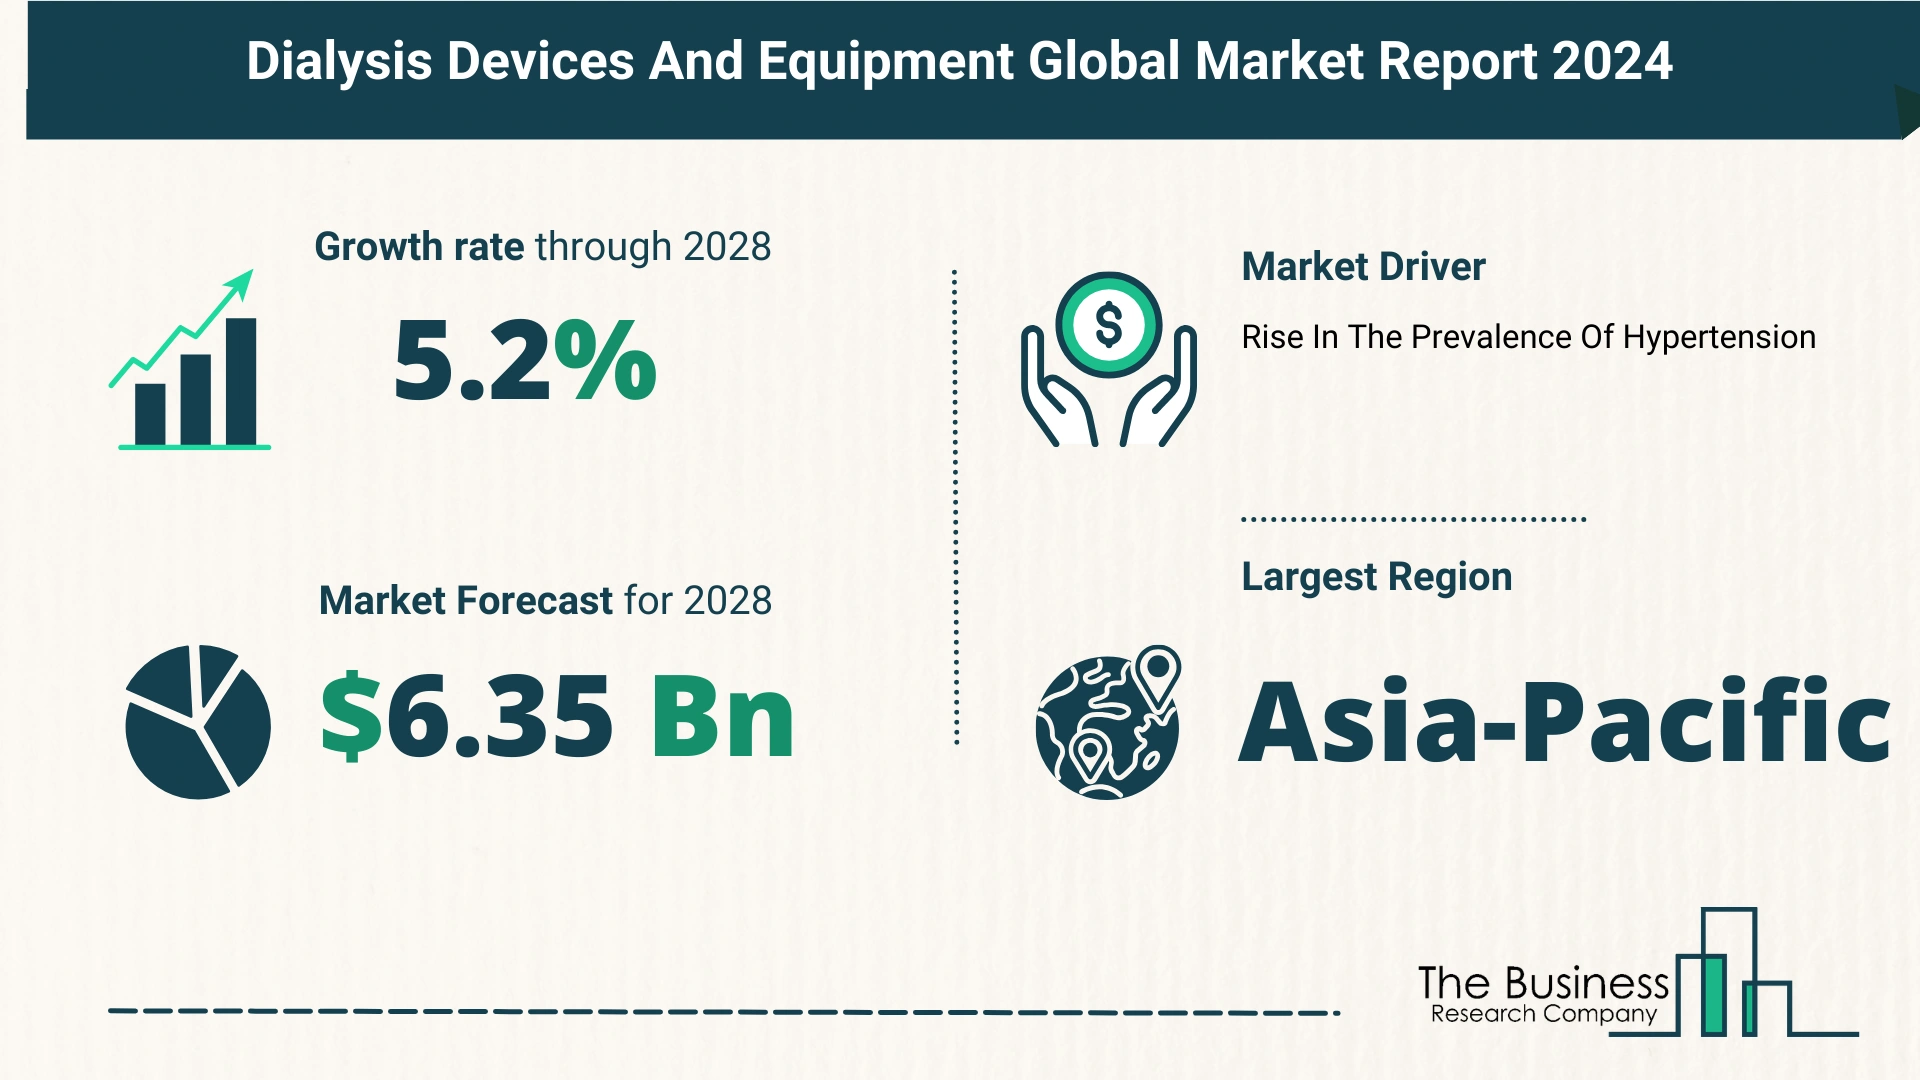 Global Dialysis Devices And Equipment Market